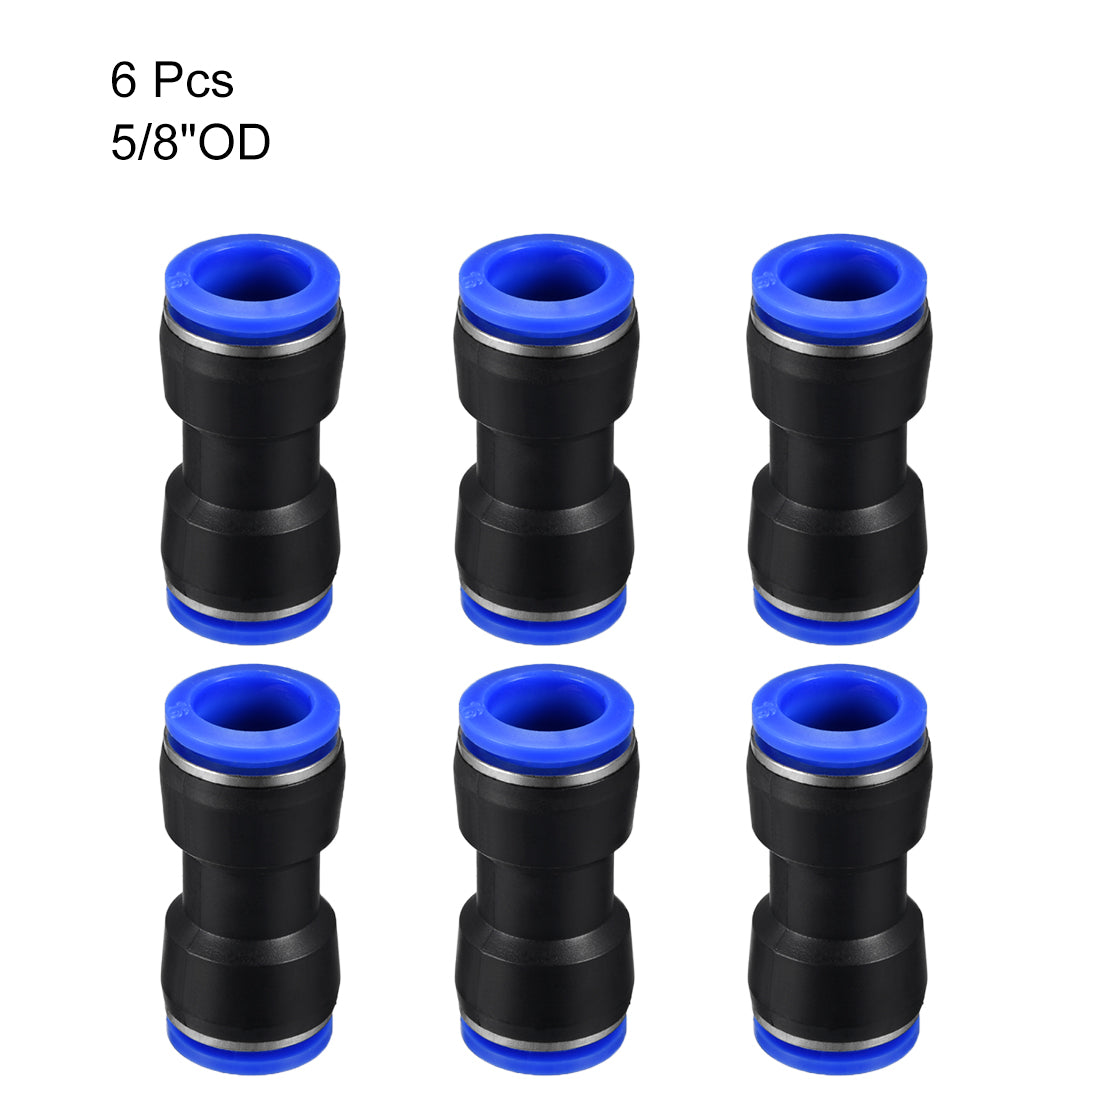 uxcell Uxcell 6pcs Push to Connect Fittings Tube Connect  16mm or 5/8" Straight OD Push Fit Fittings Tube Fittings Push Lock Blue